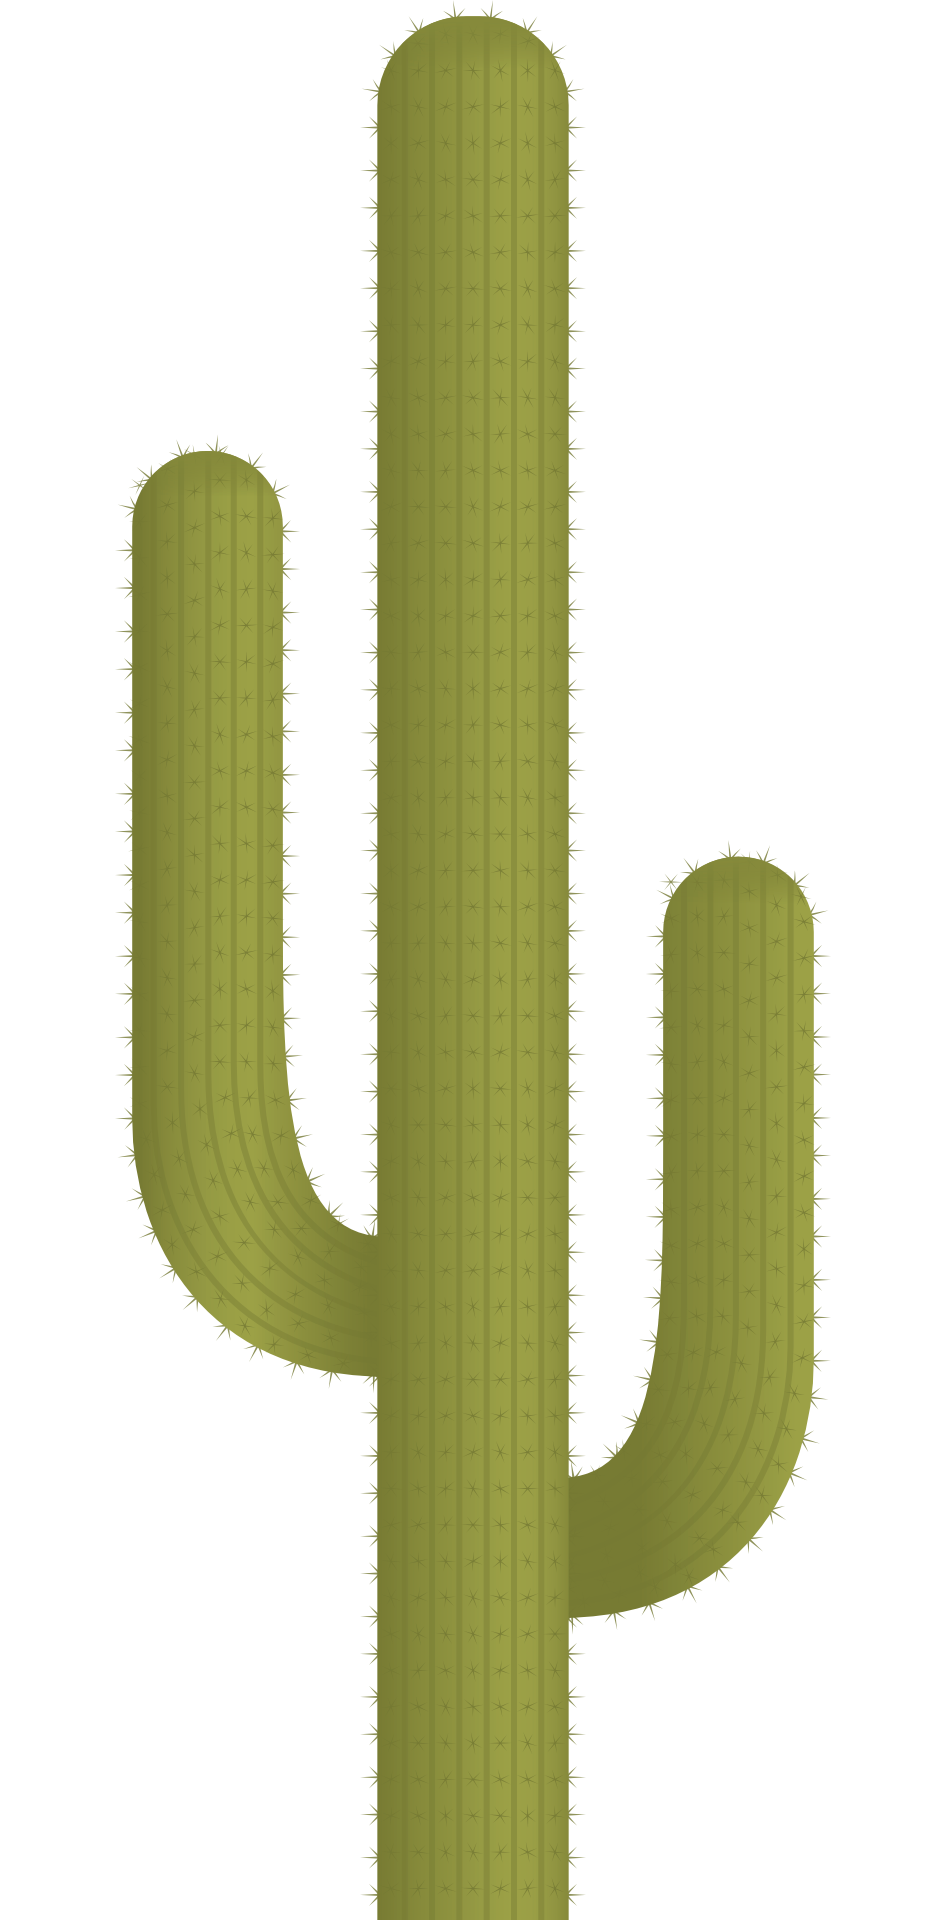 Download Cactus Plant Vector Png Image For Free